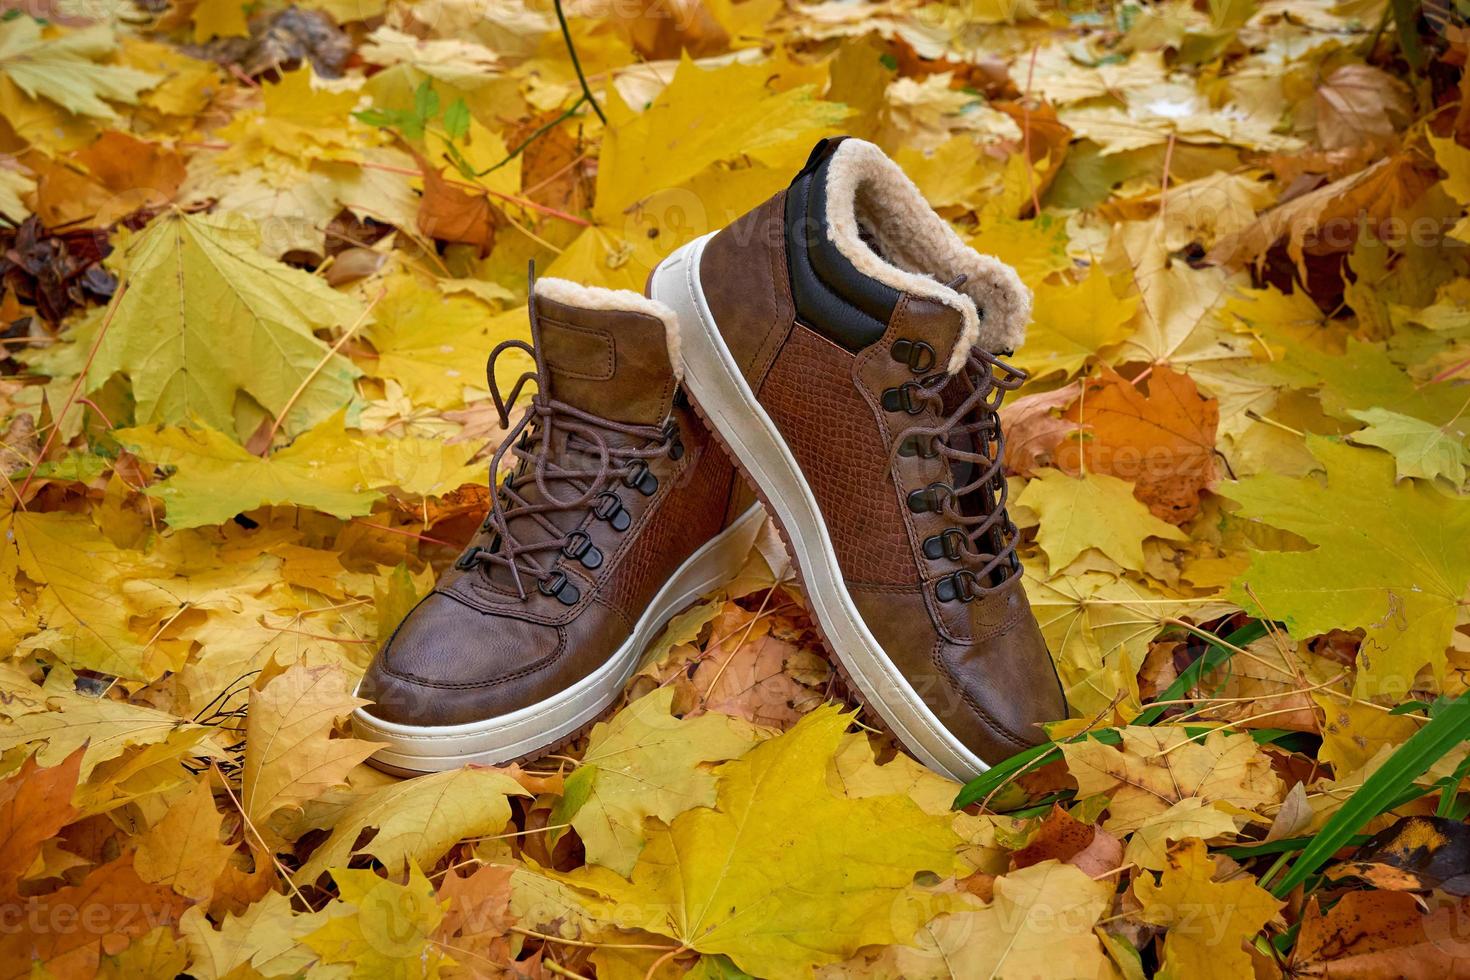 A pair of warm men's leather boots stand on fallen leaves. photo